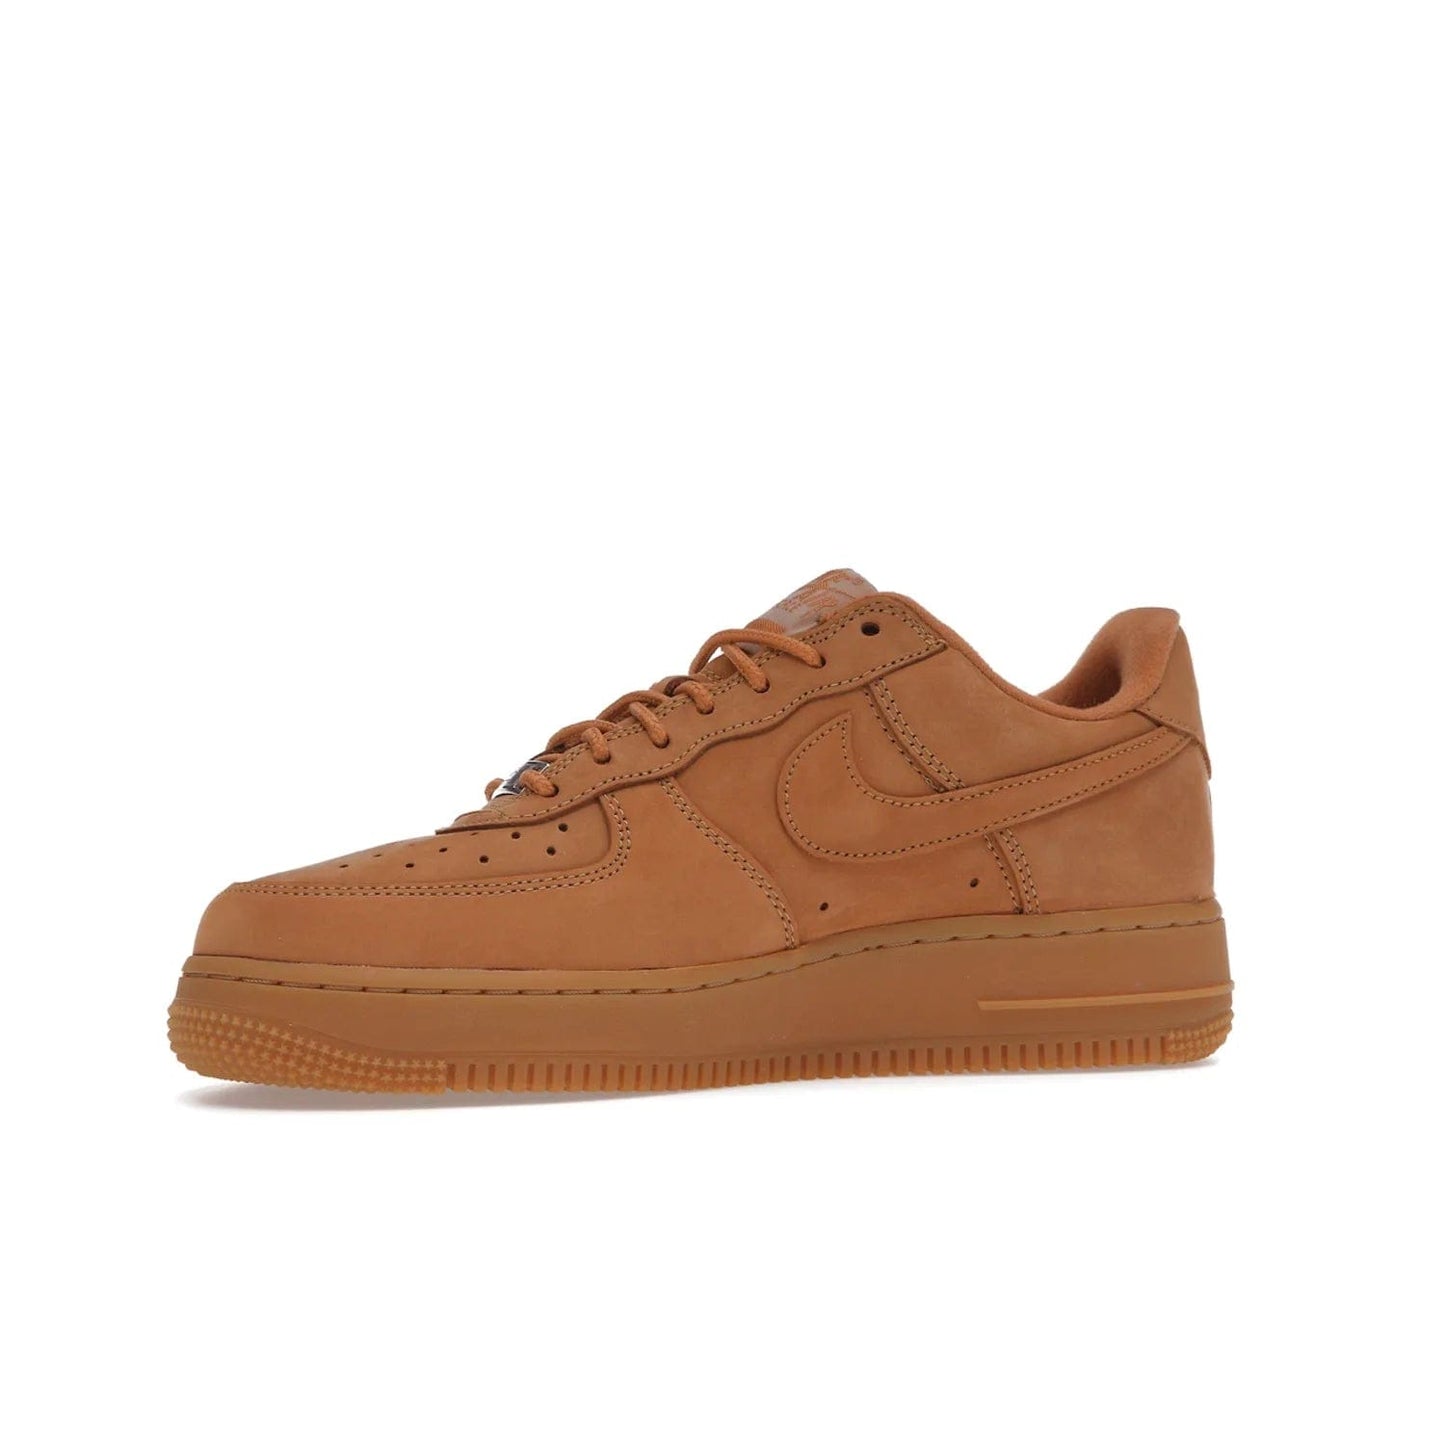 Nike Air Force 1 Low SP Supreme Wheat - Image 17 - Only at www.BallersClubKickz.com - A luxe Flax Durabuck upper and Supreme Box Logo insignias on the lateral heels make the Nike Air Force 1 Low SP Supreme Wheat a stylish lifestyle shoe. Matching Flax Air sole adds a classic touch to this collaboration between Nike and Supreme. Make a statement with this edition of the classic Air Force 1 Low.